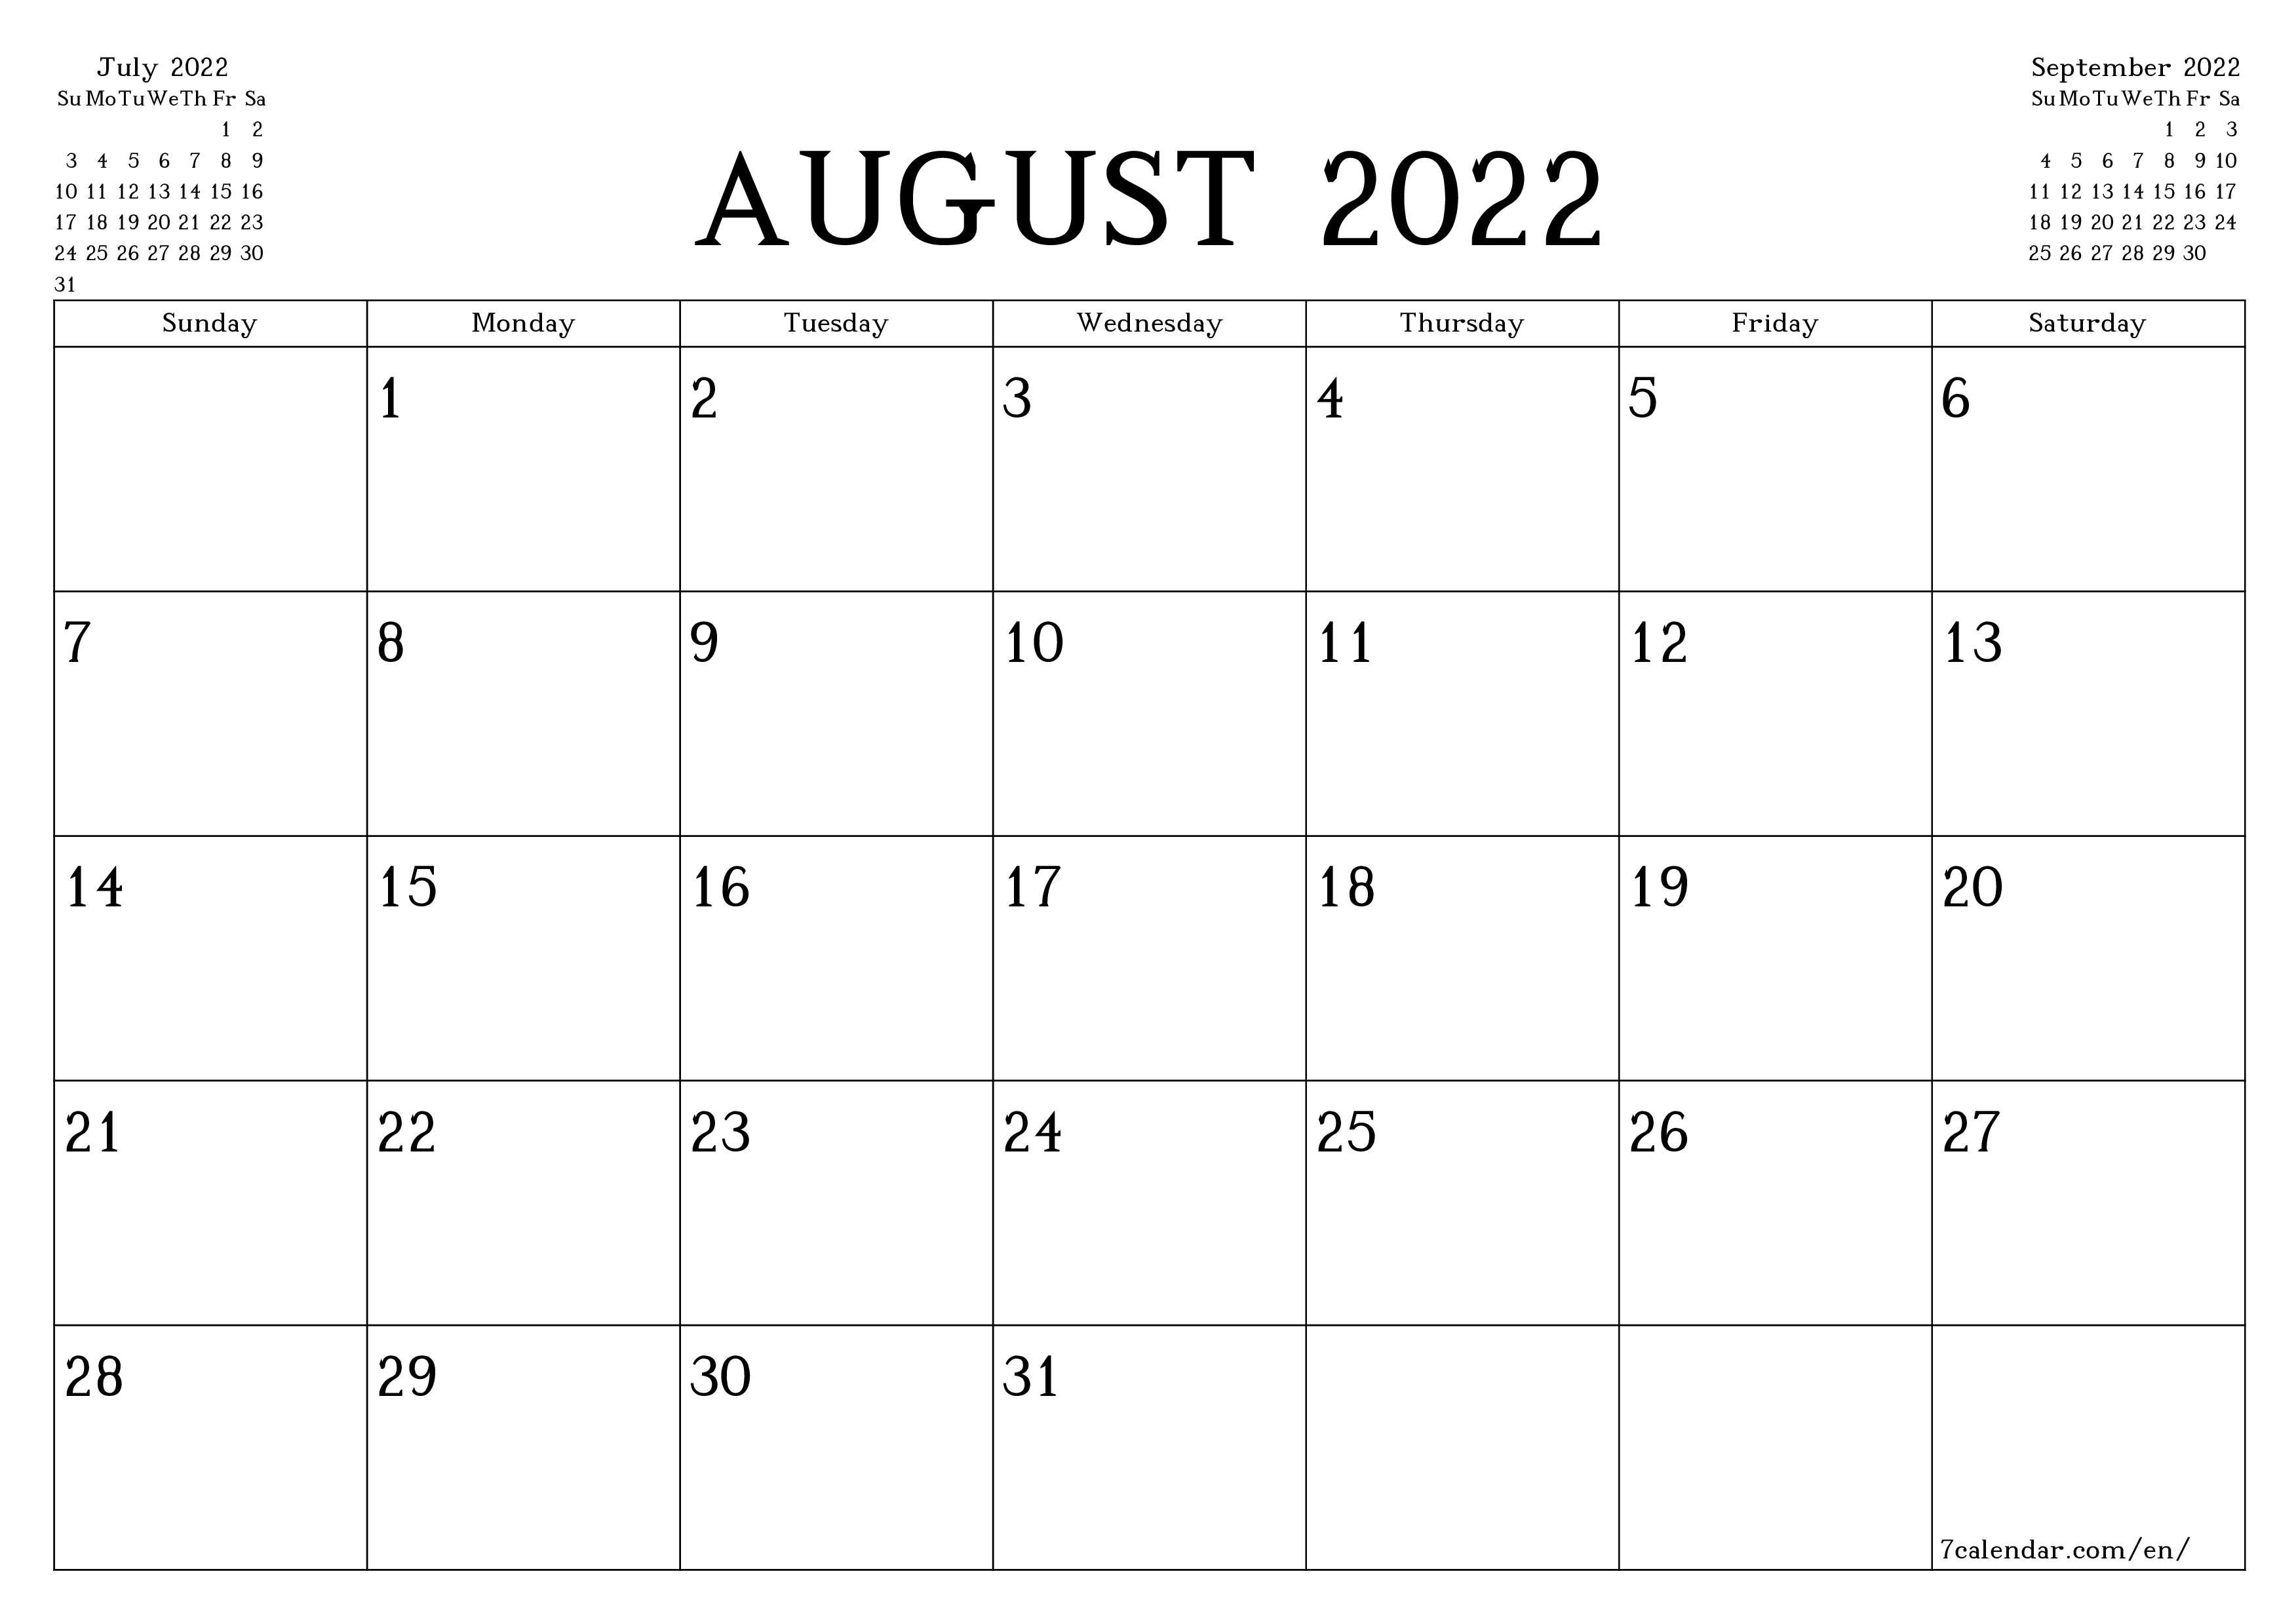 Monthly Calendar August 2022 August 2022 Free Printable Calendars And Planners, Pdf Templates - 7Calendar